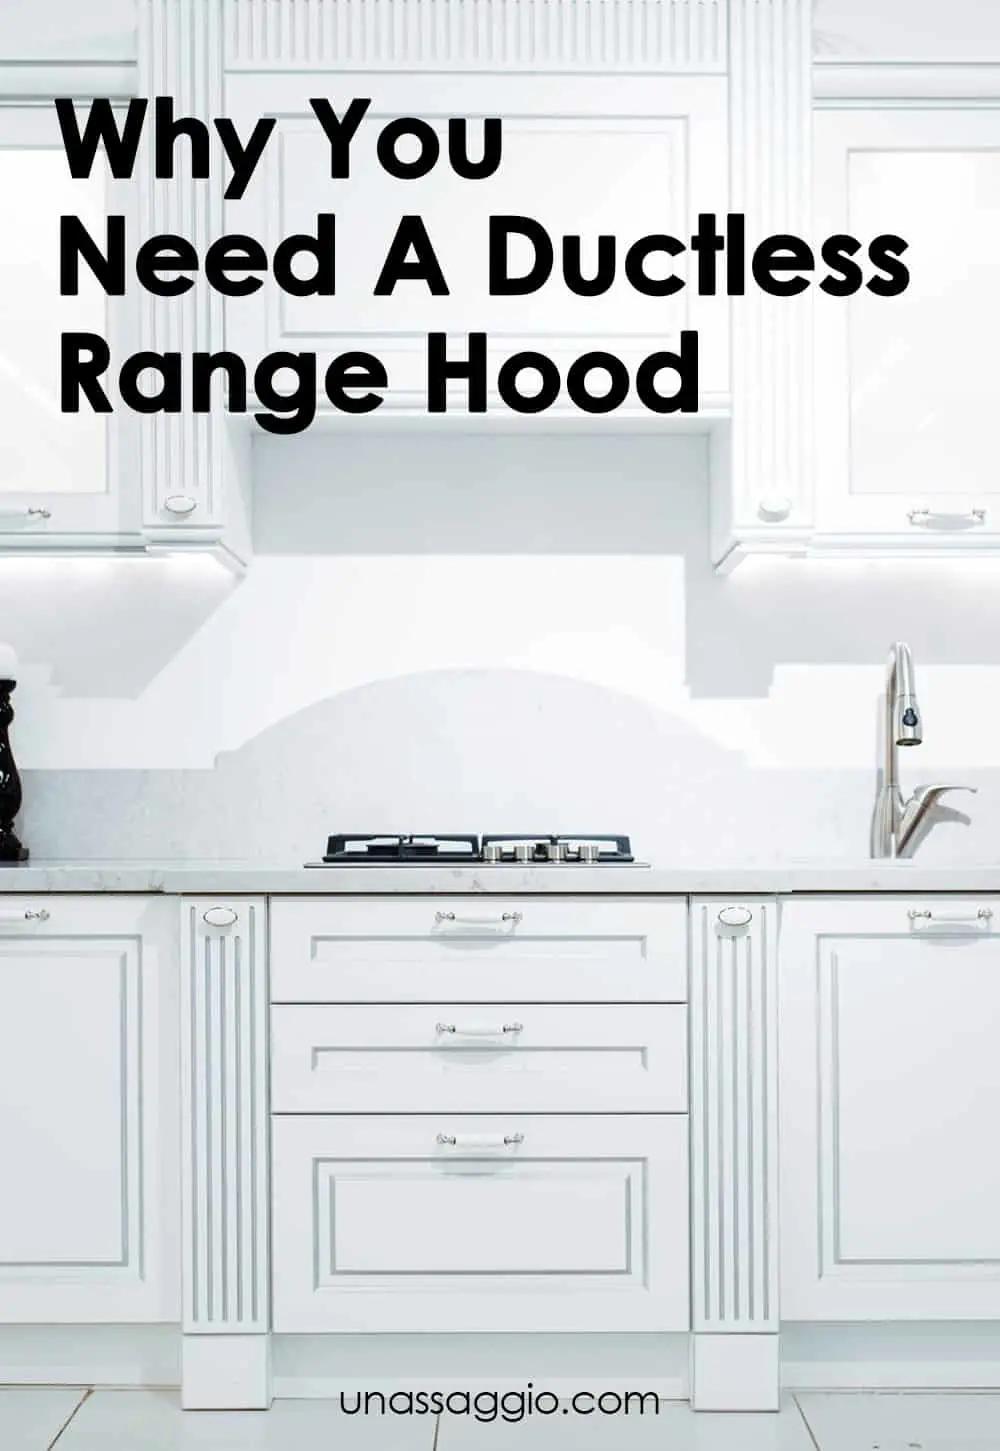 Why You Need A Ductless Range Hood